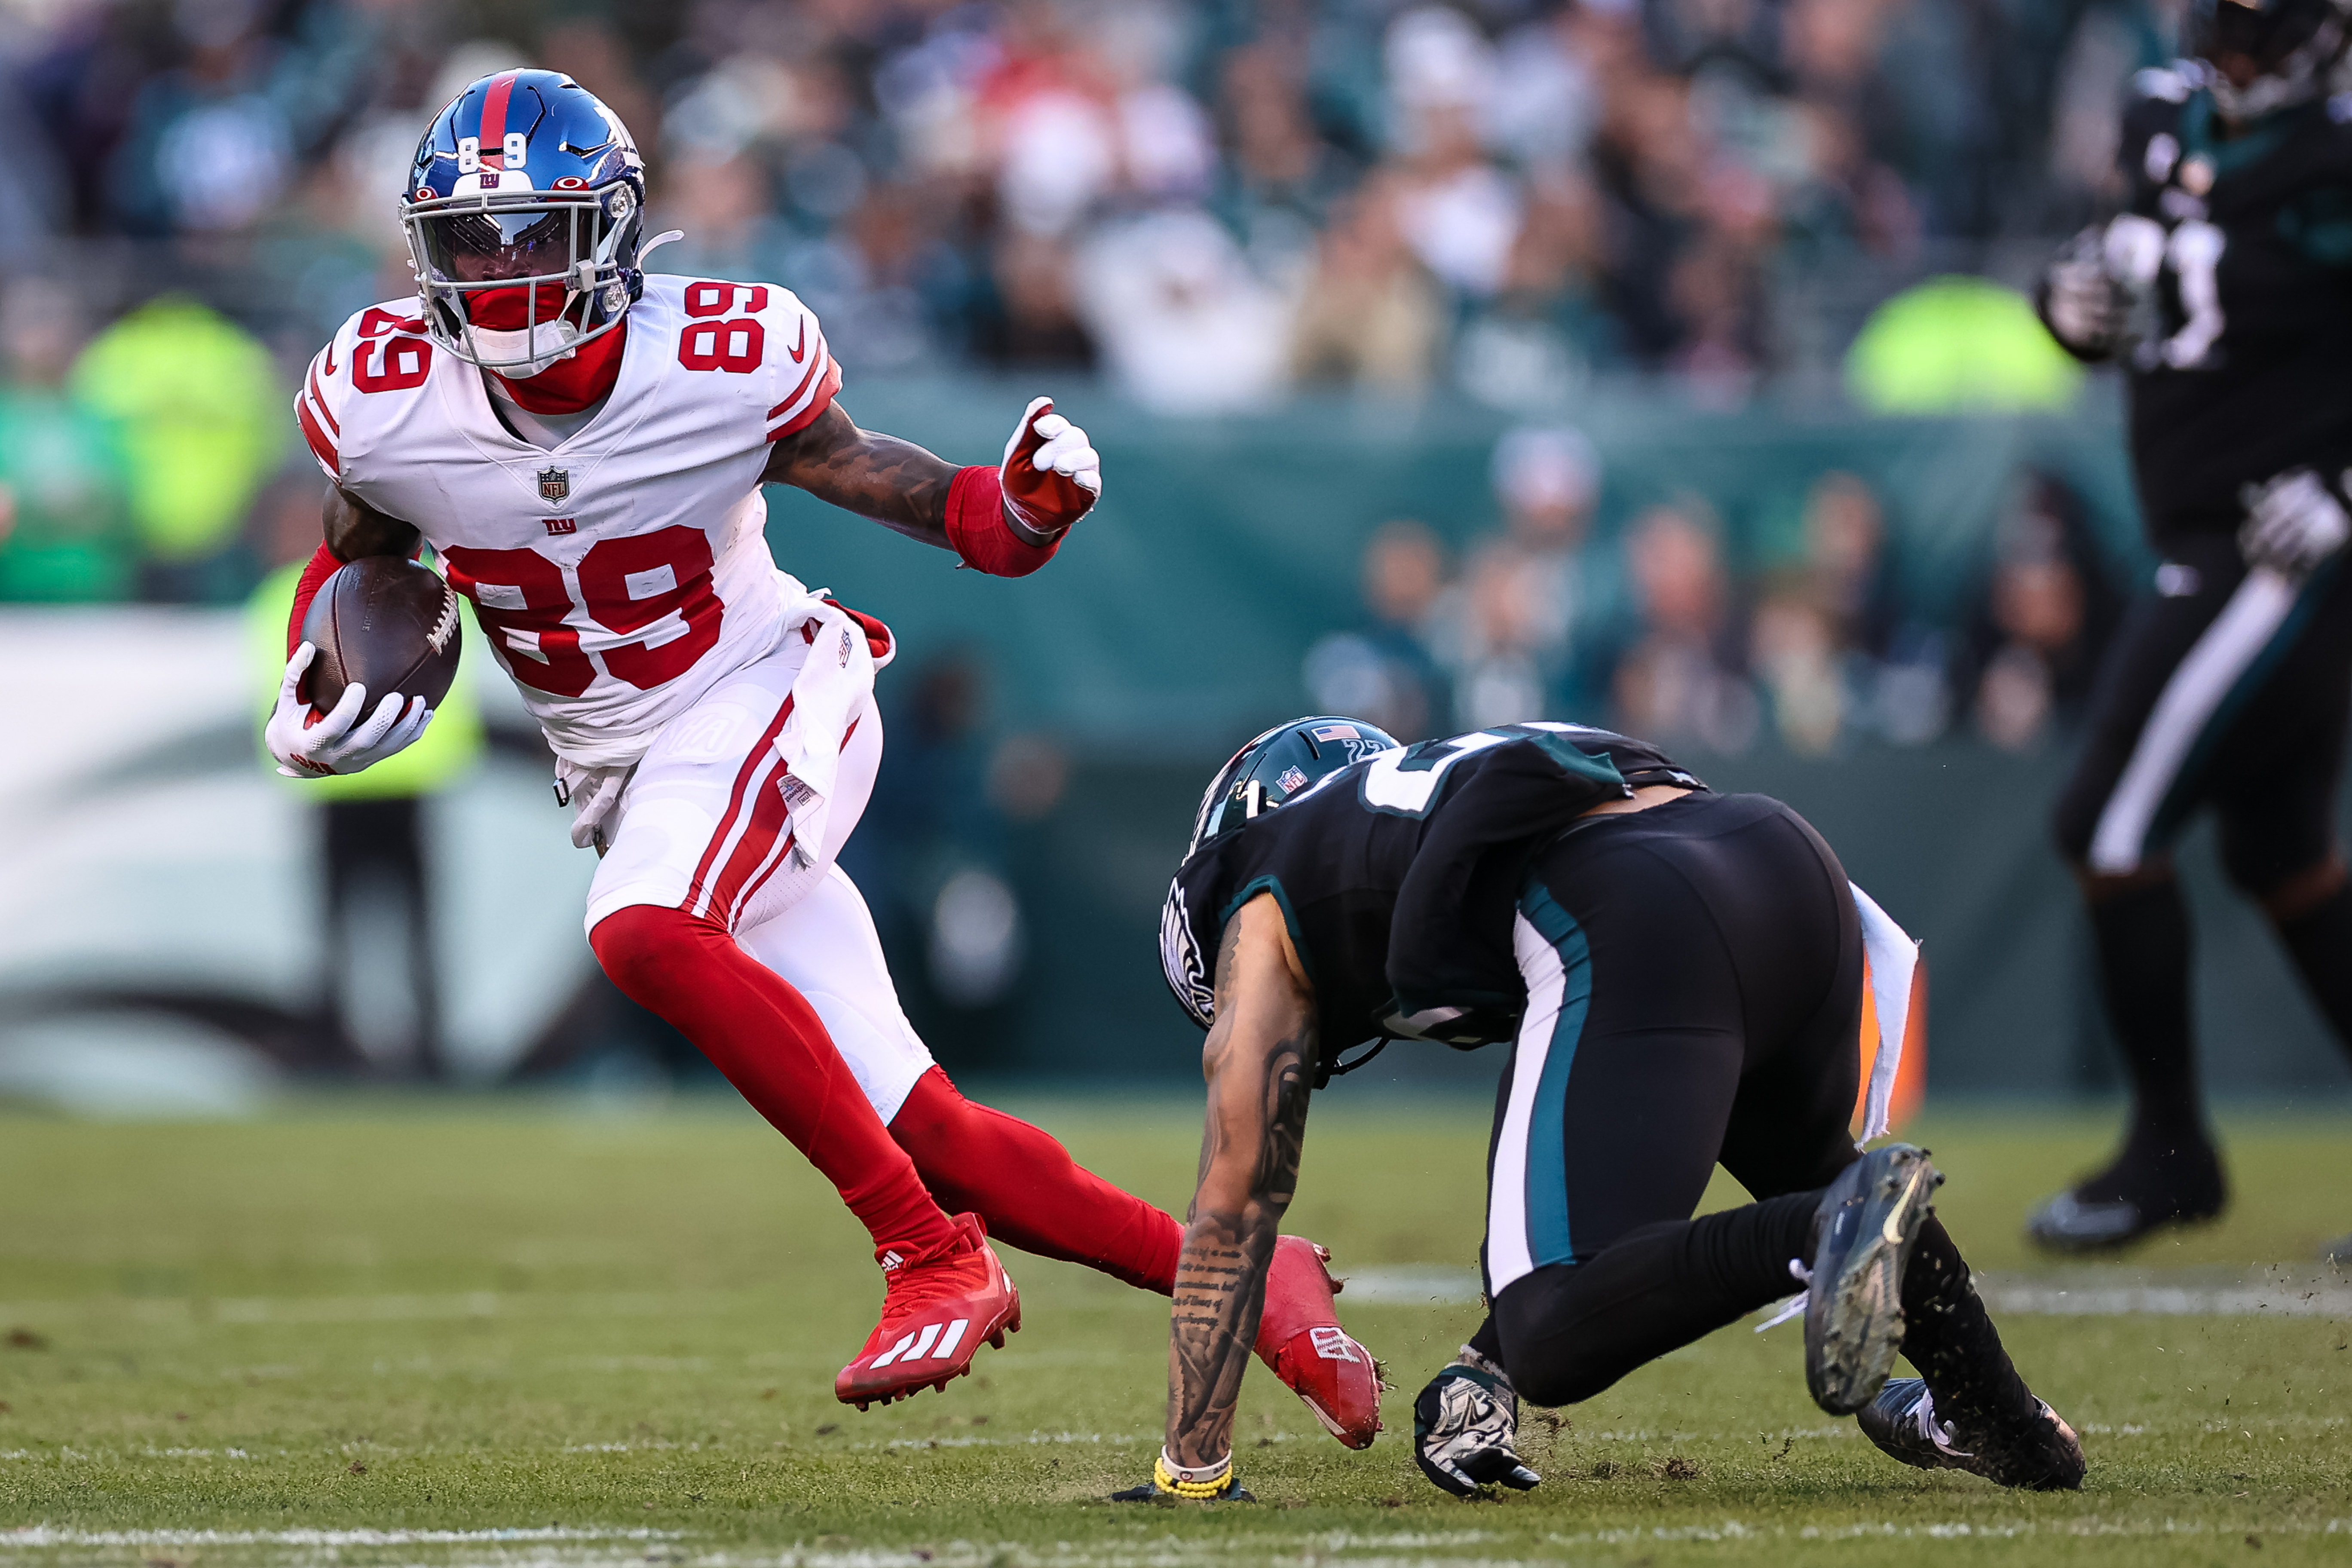 Kadarius Toney of the New York Giants could be a buy-low candidate for the San Francisco 49ers.